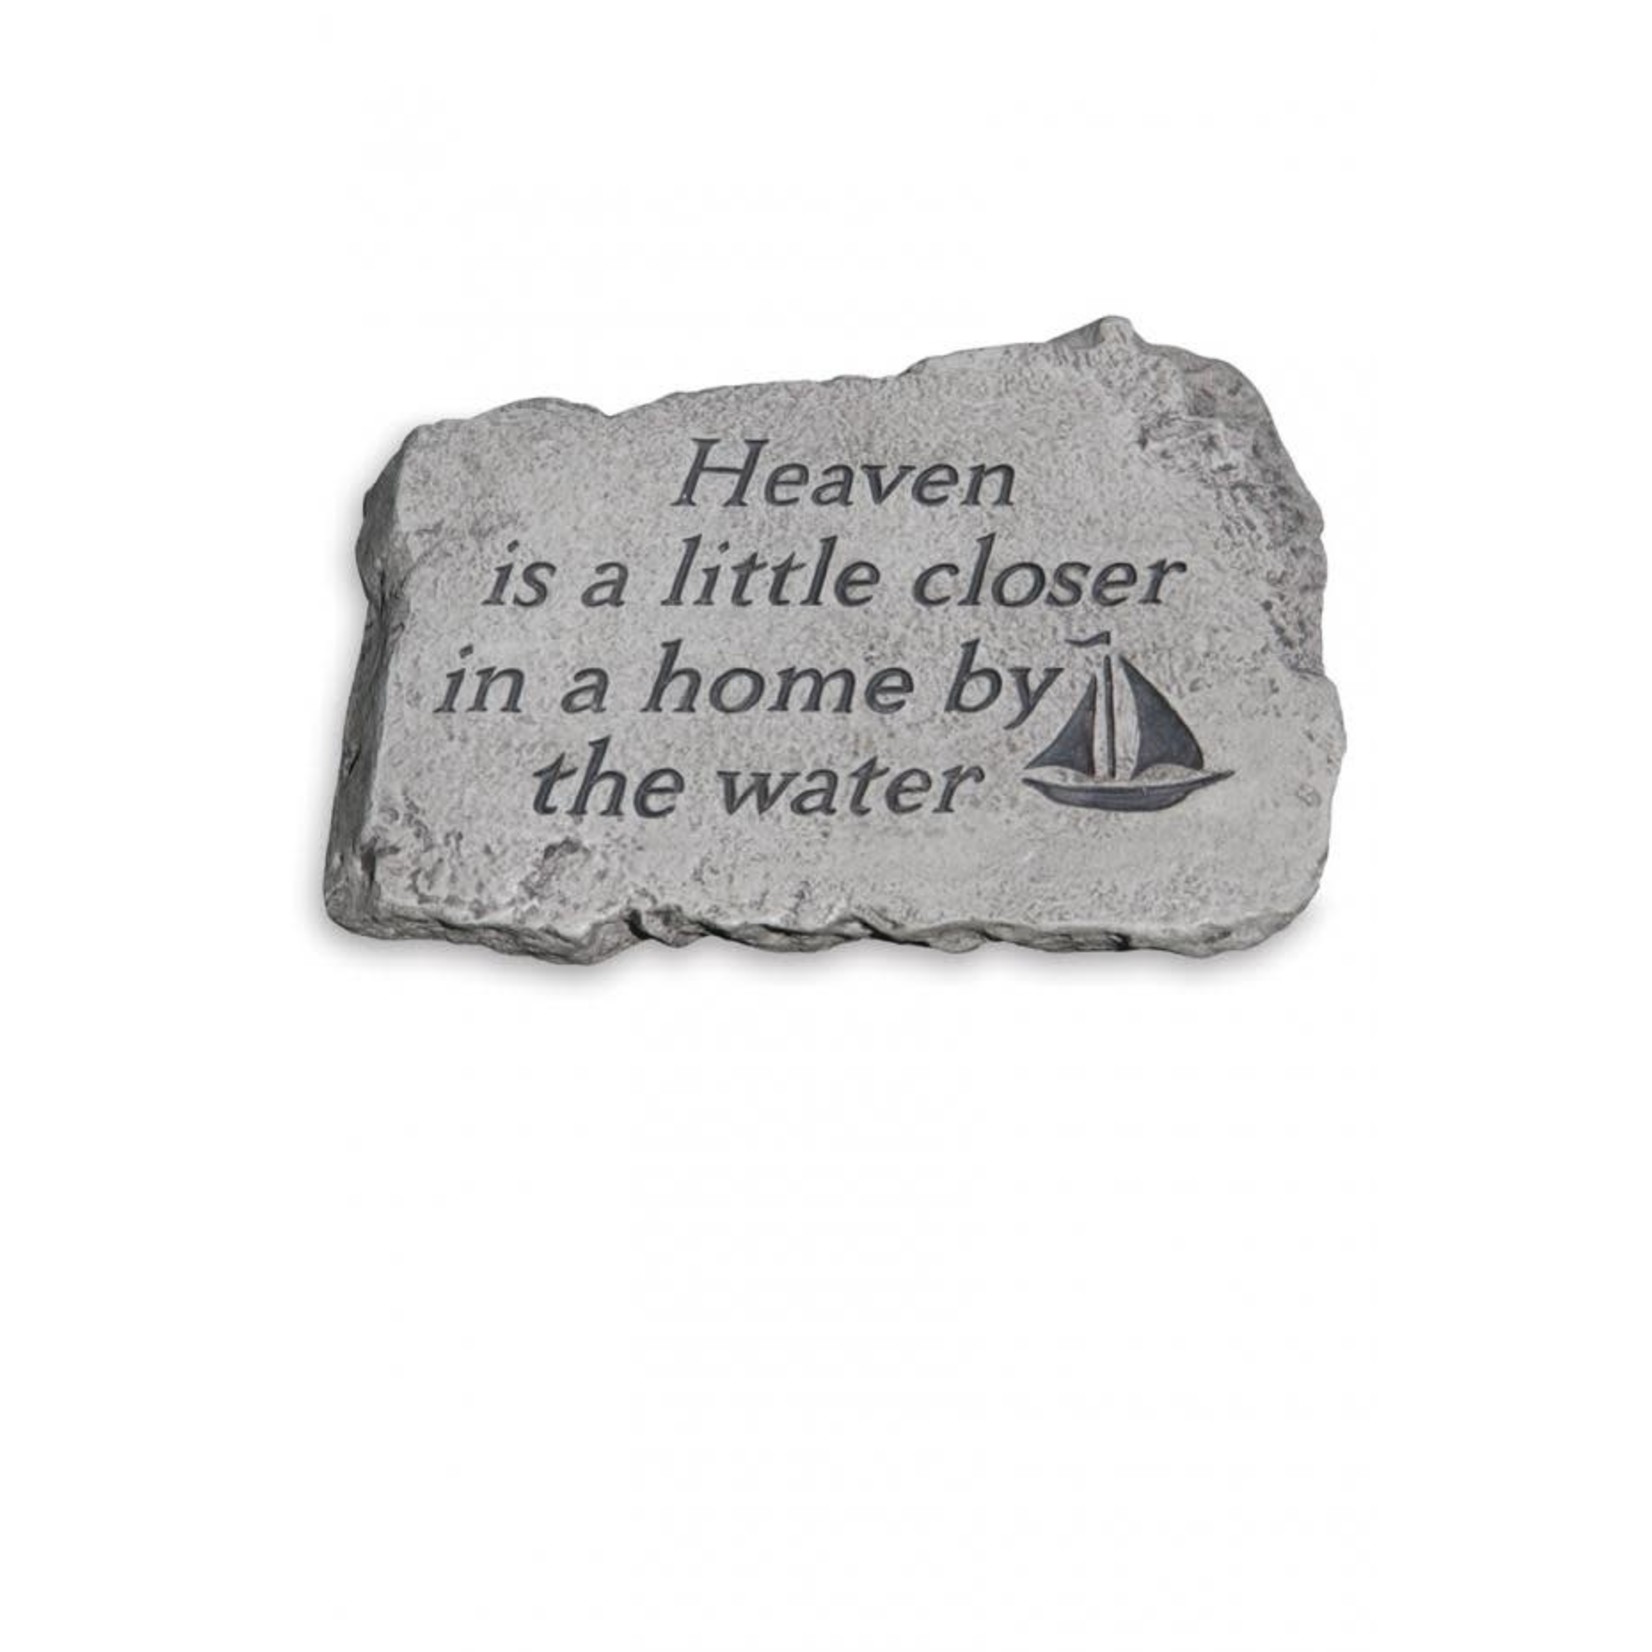 STEPPING STONE 10IN - HEAVEN IS A LITTLE CLOSER IN A HOME BY THE WATER